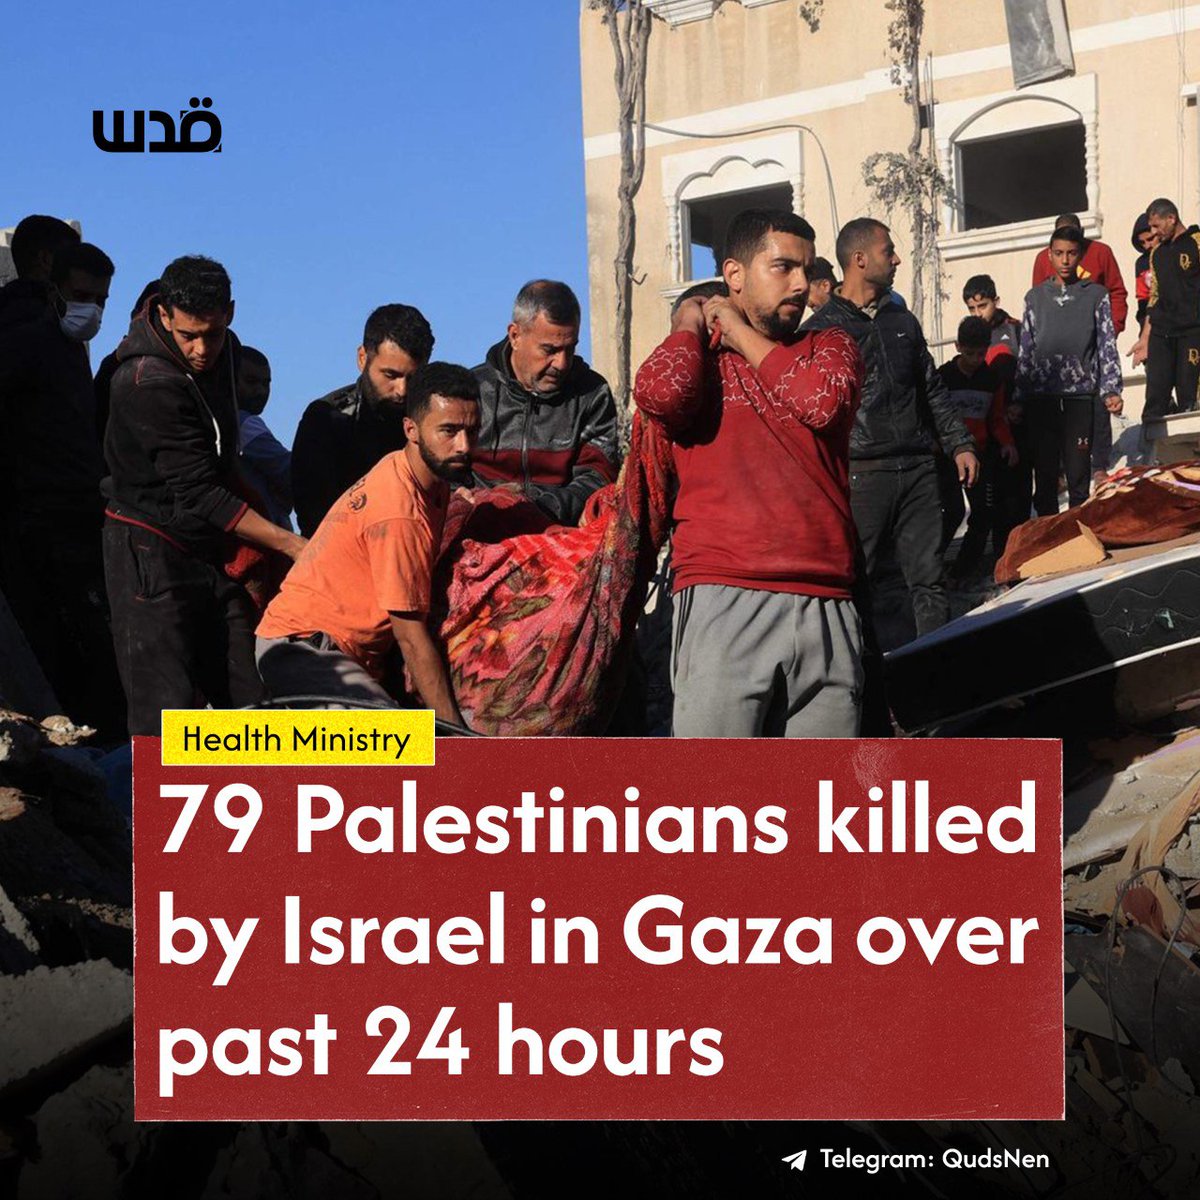 According to the Ministry of Health, Israel killed 79 Palestinians and wounded 86 others in 6 massacres committed in Gaza in the past 24 hours.